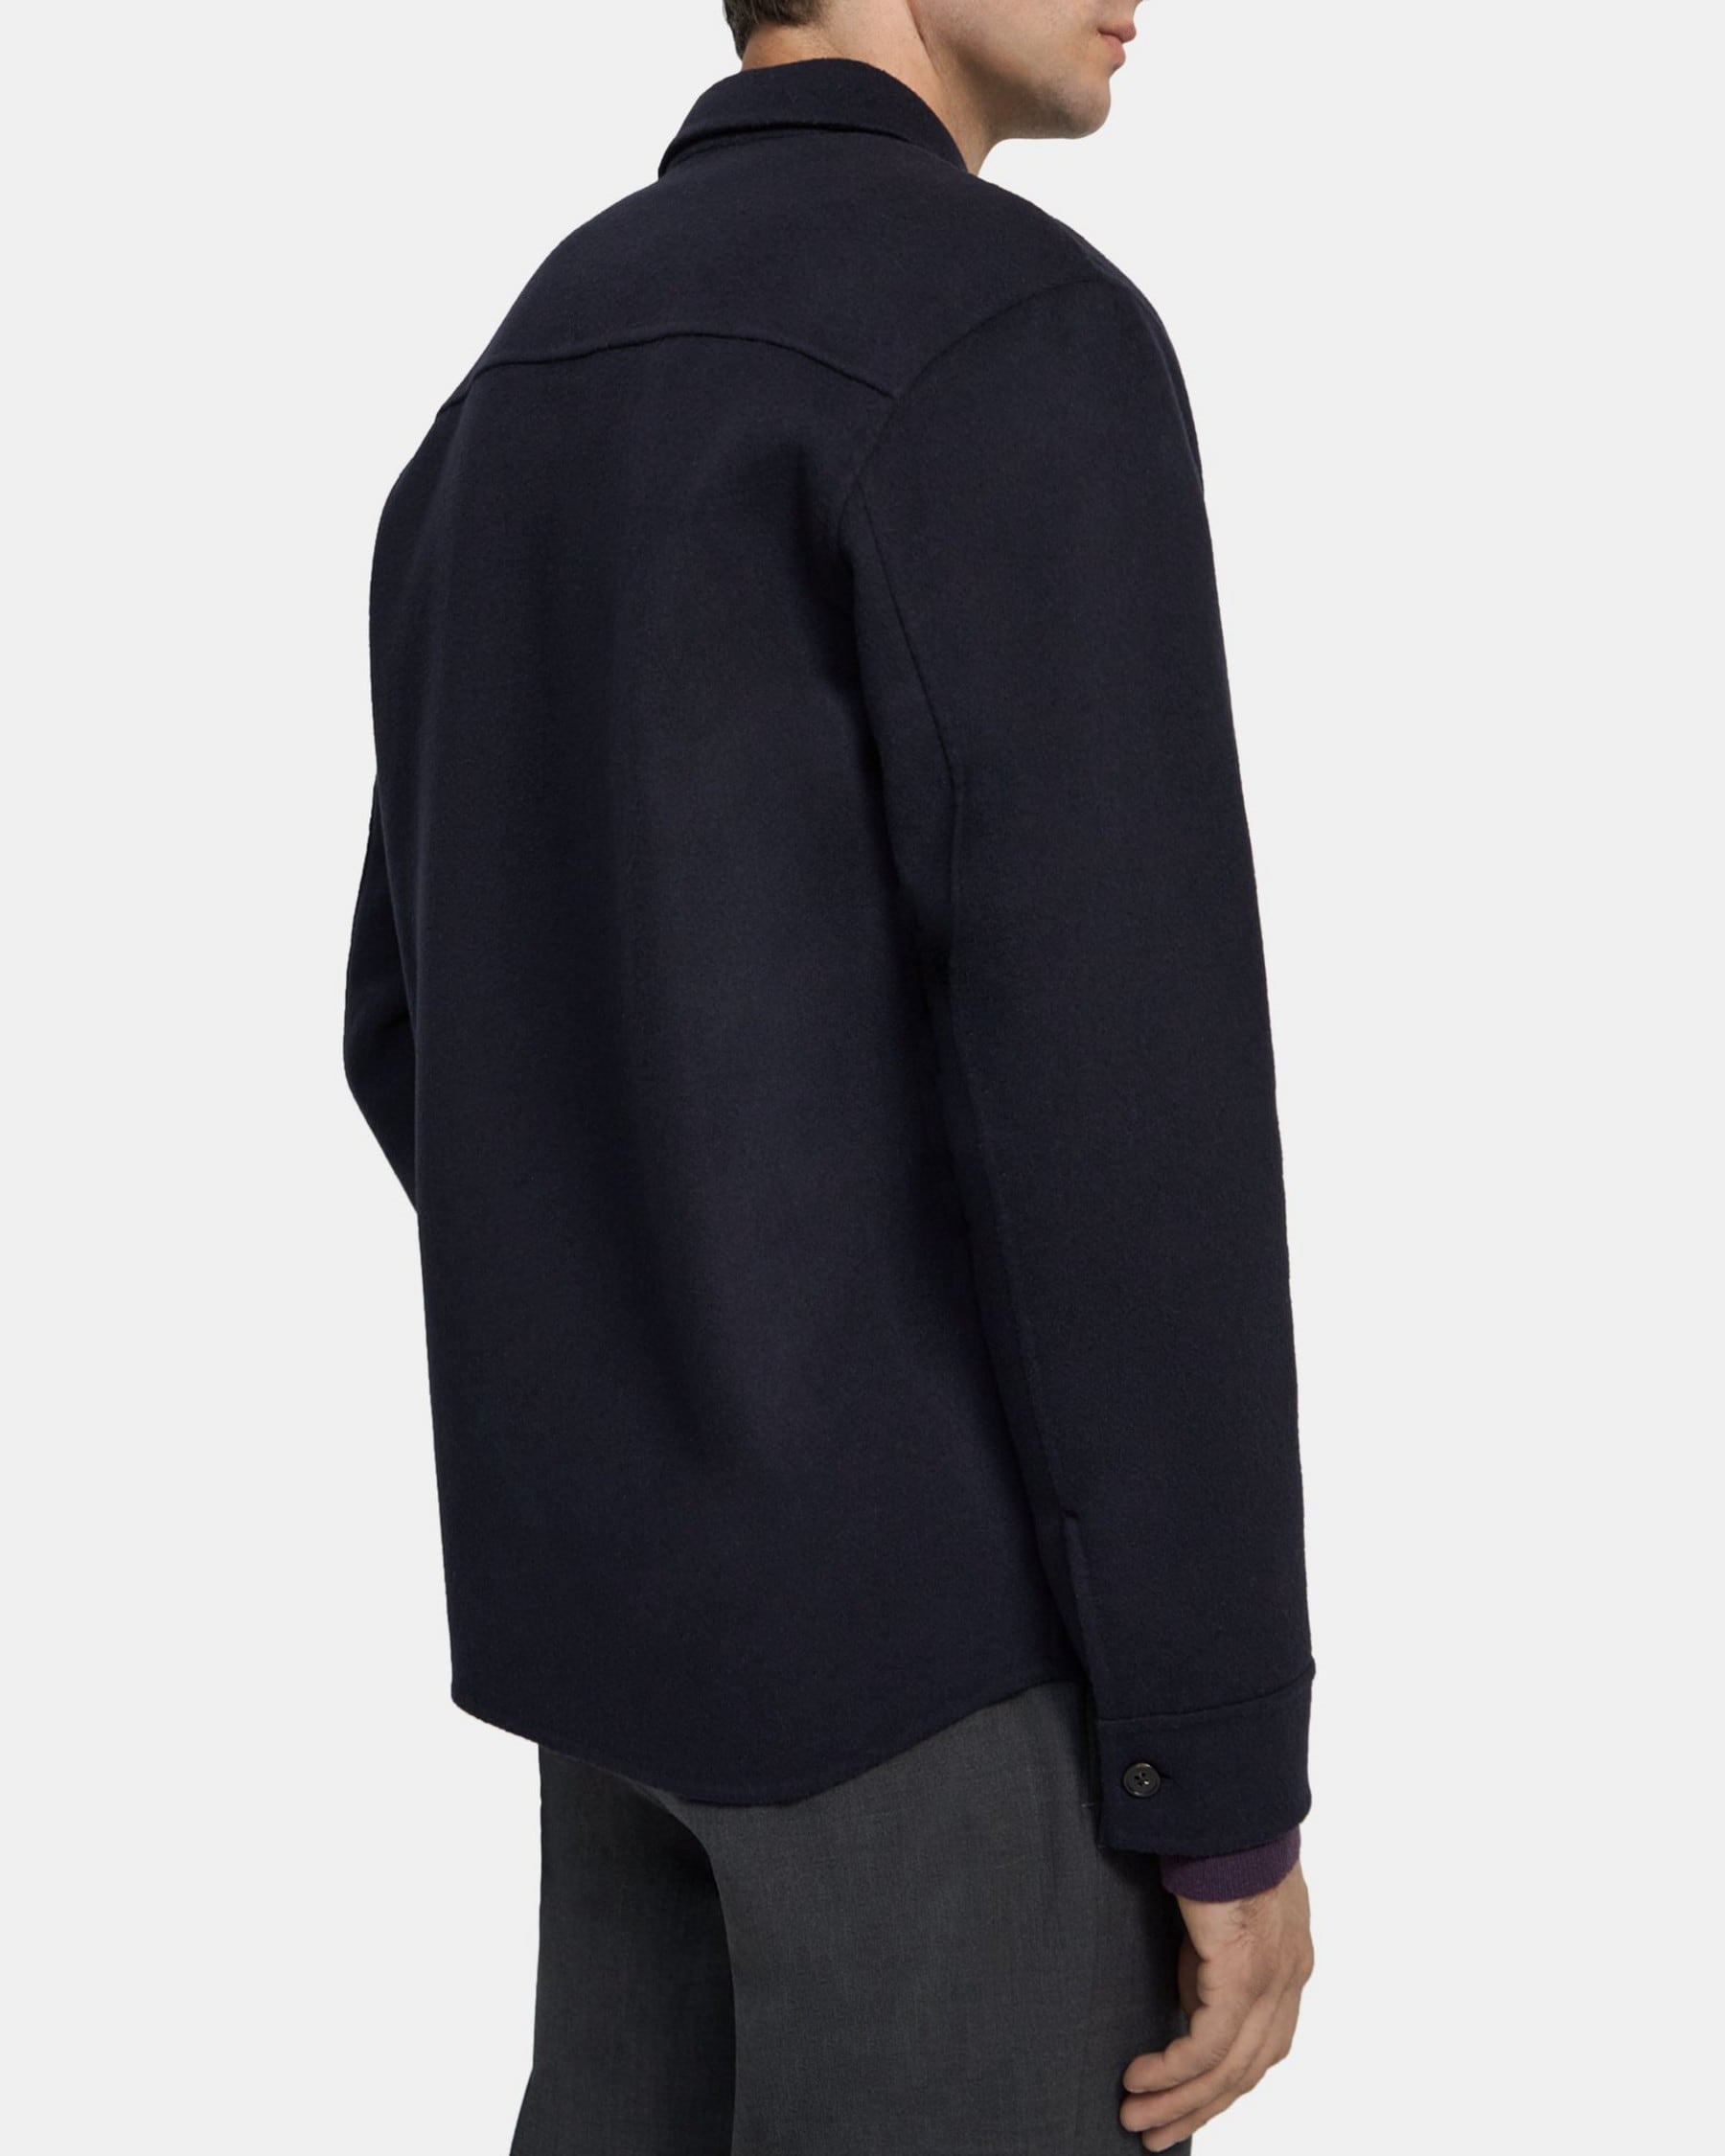 Clyfford Shirt Jacket in Double-Face Wool-Cashmere